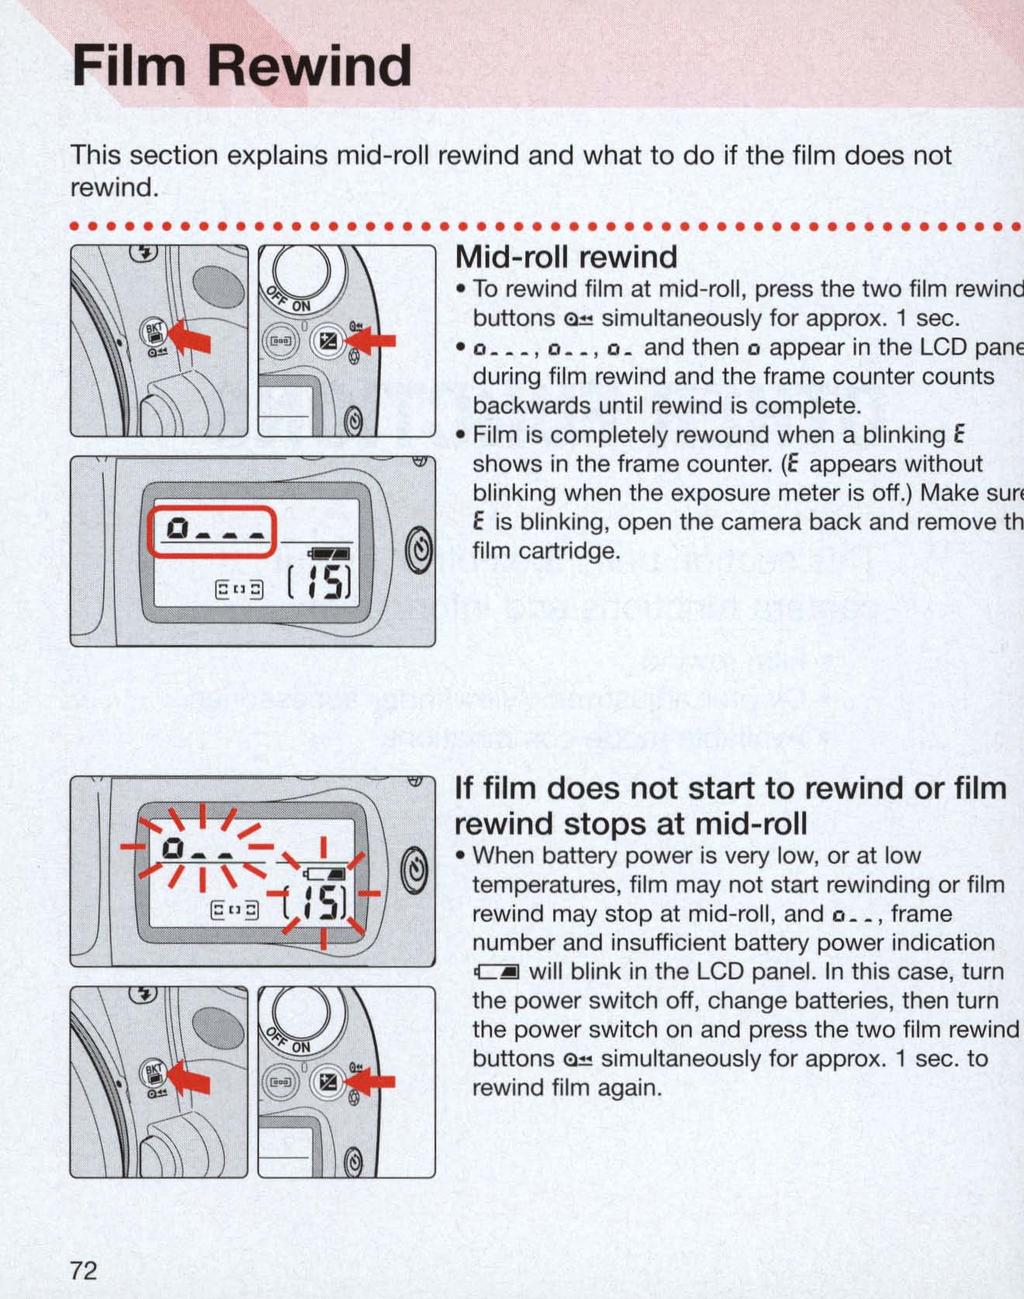 Film Rewind This section explains mid-roll rewind and what to do if the film does not rewind.